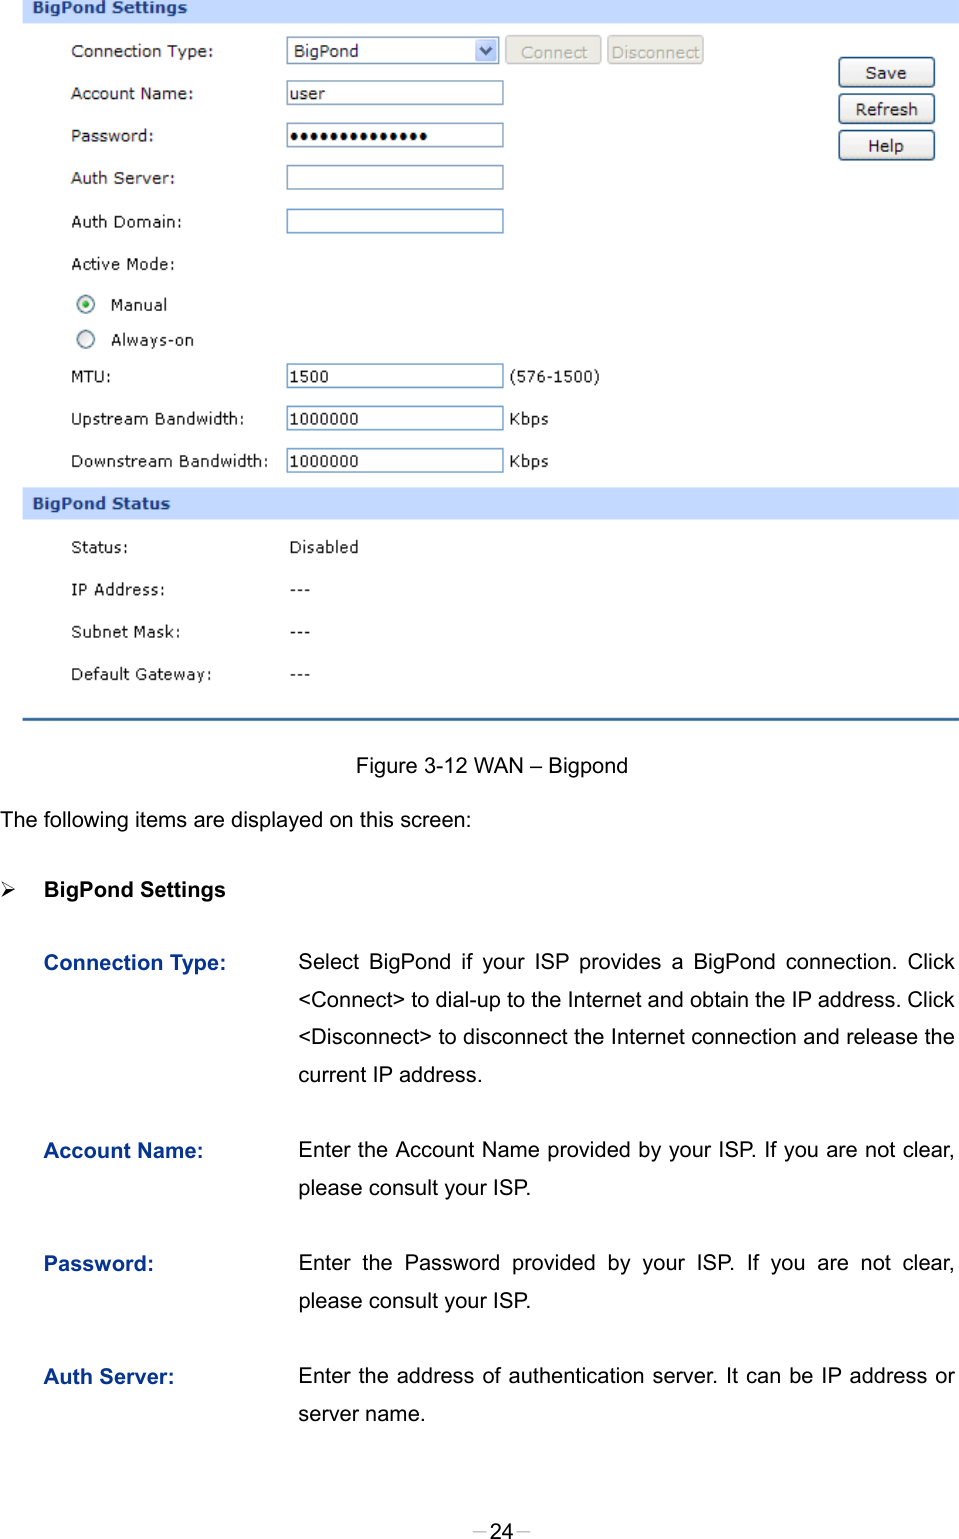   Figure 3-12 WAN – Bigpond The following items are displayed on this screen:  BigPond Settings   Connection Type:  Select BigPond if your ISP provides a BigPond connection. Click &lt;Connect&gt; to dial-up to the Internet and obtain the IP address. Click &lt;Disconnect&gt; to disconnect the Internet connection and release the current IP address.   Account Name:  Enter the Account Name provided by your ISP. If you are not clear, please consult your ISP. Password: Enter the Password provided by your ISP. If you are not clear, please consult your ISP. Auth Server:  Enter the address of authentication server. It can be IP address or server name. -24- 